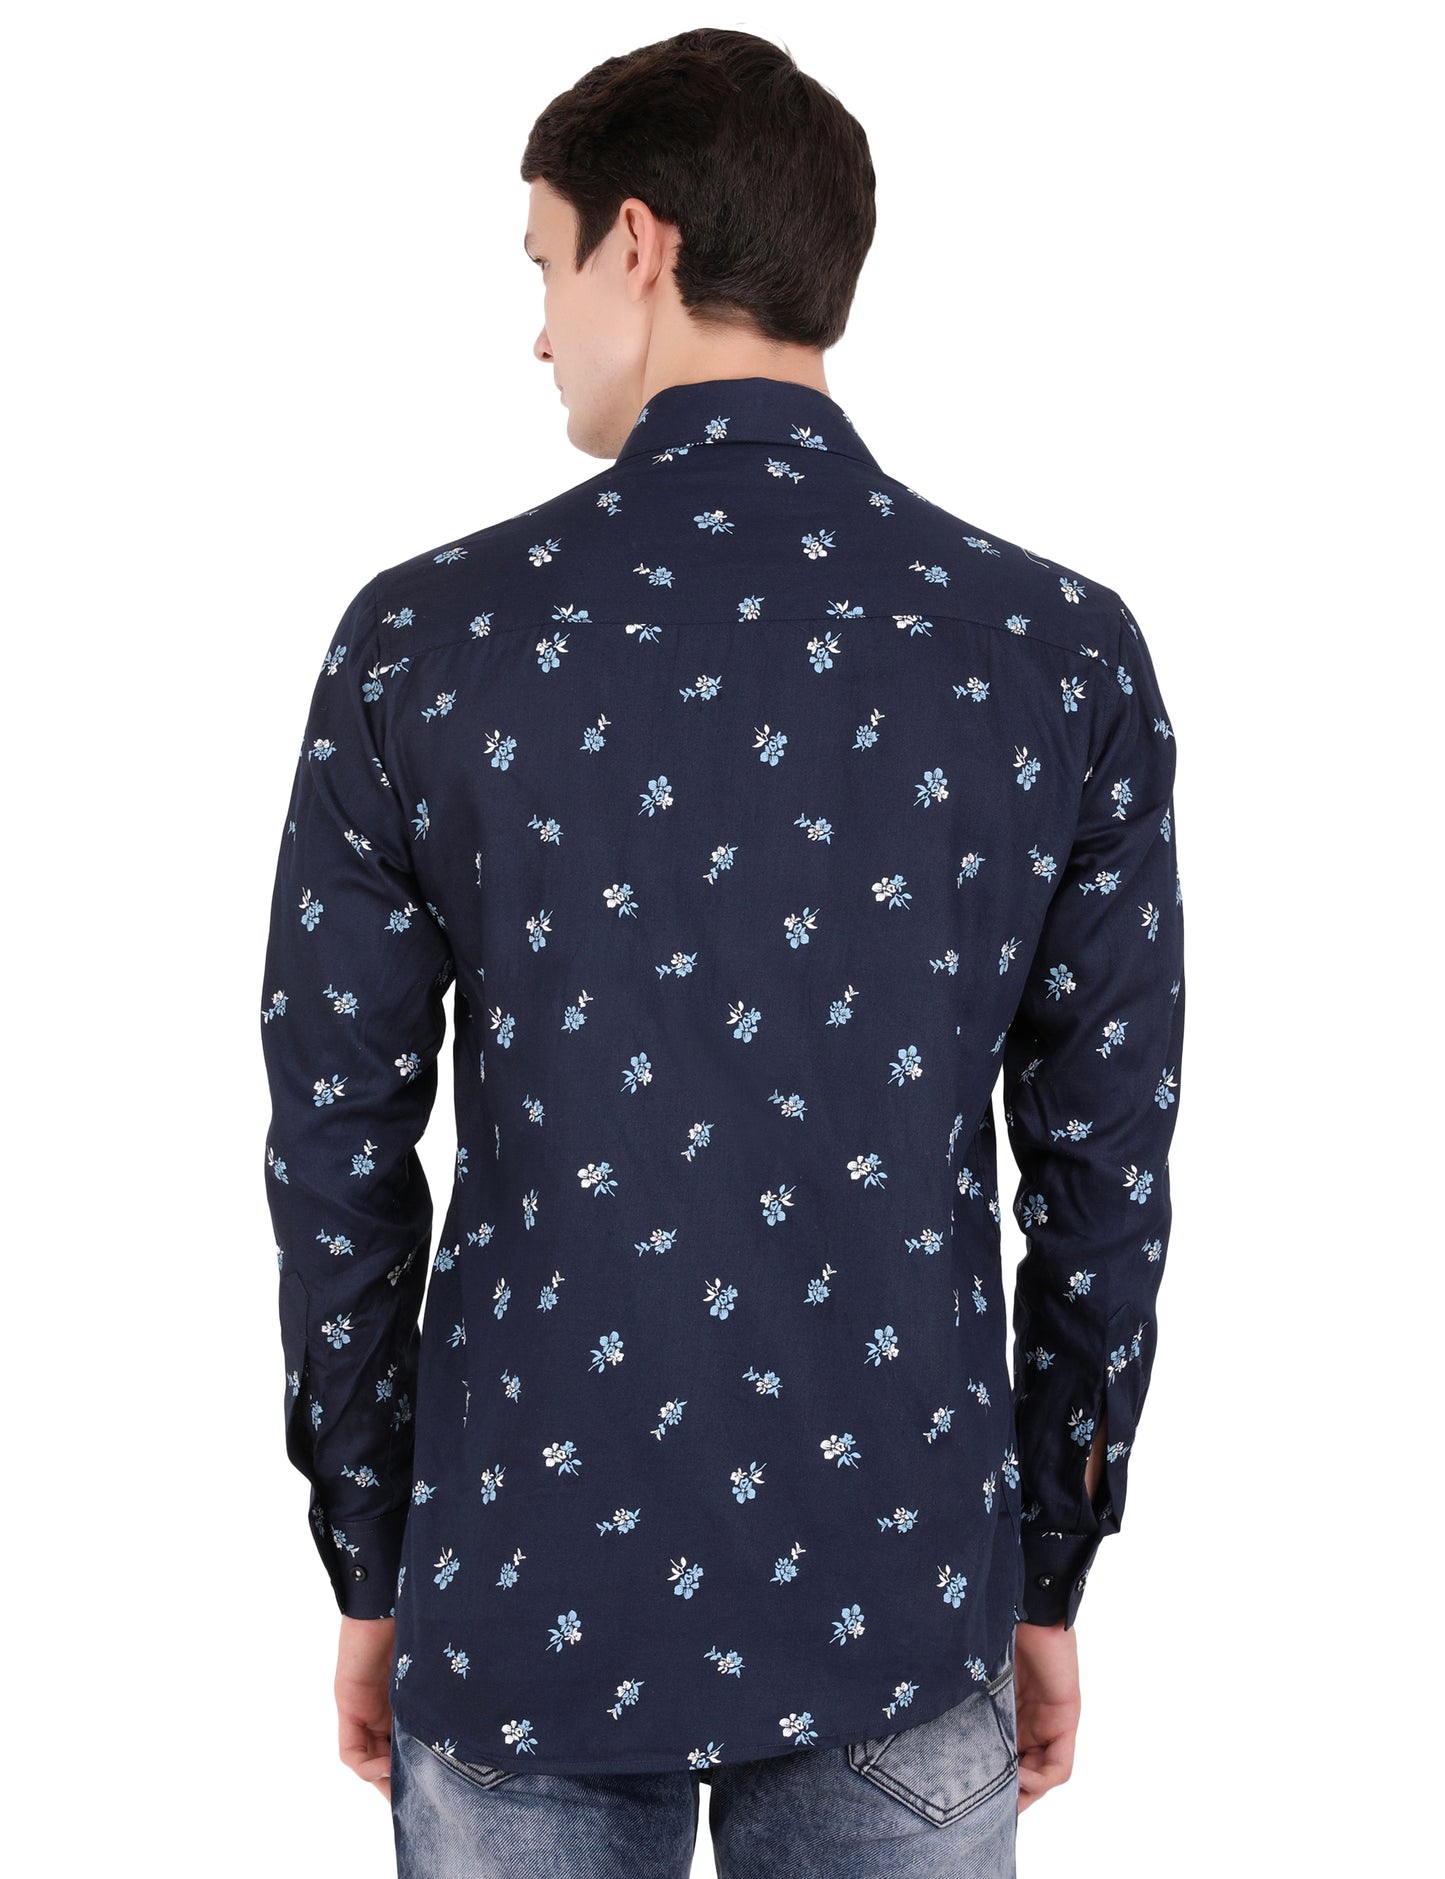 Blossoms in Blue: Printed Shirt with Big Flowers Pattern